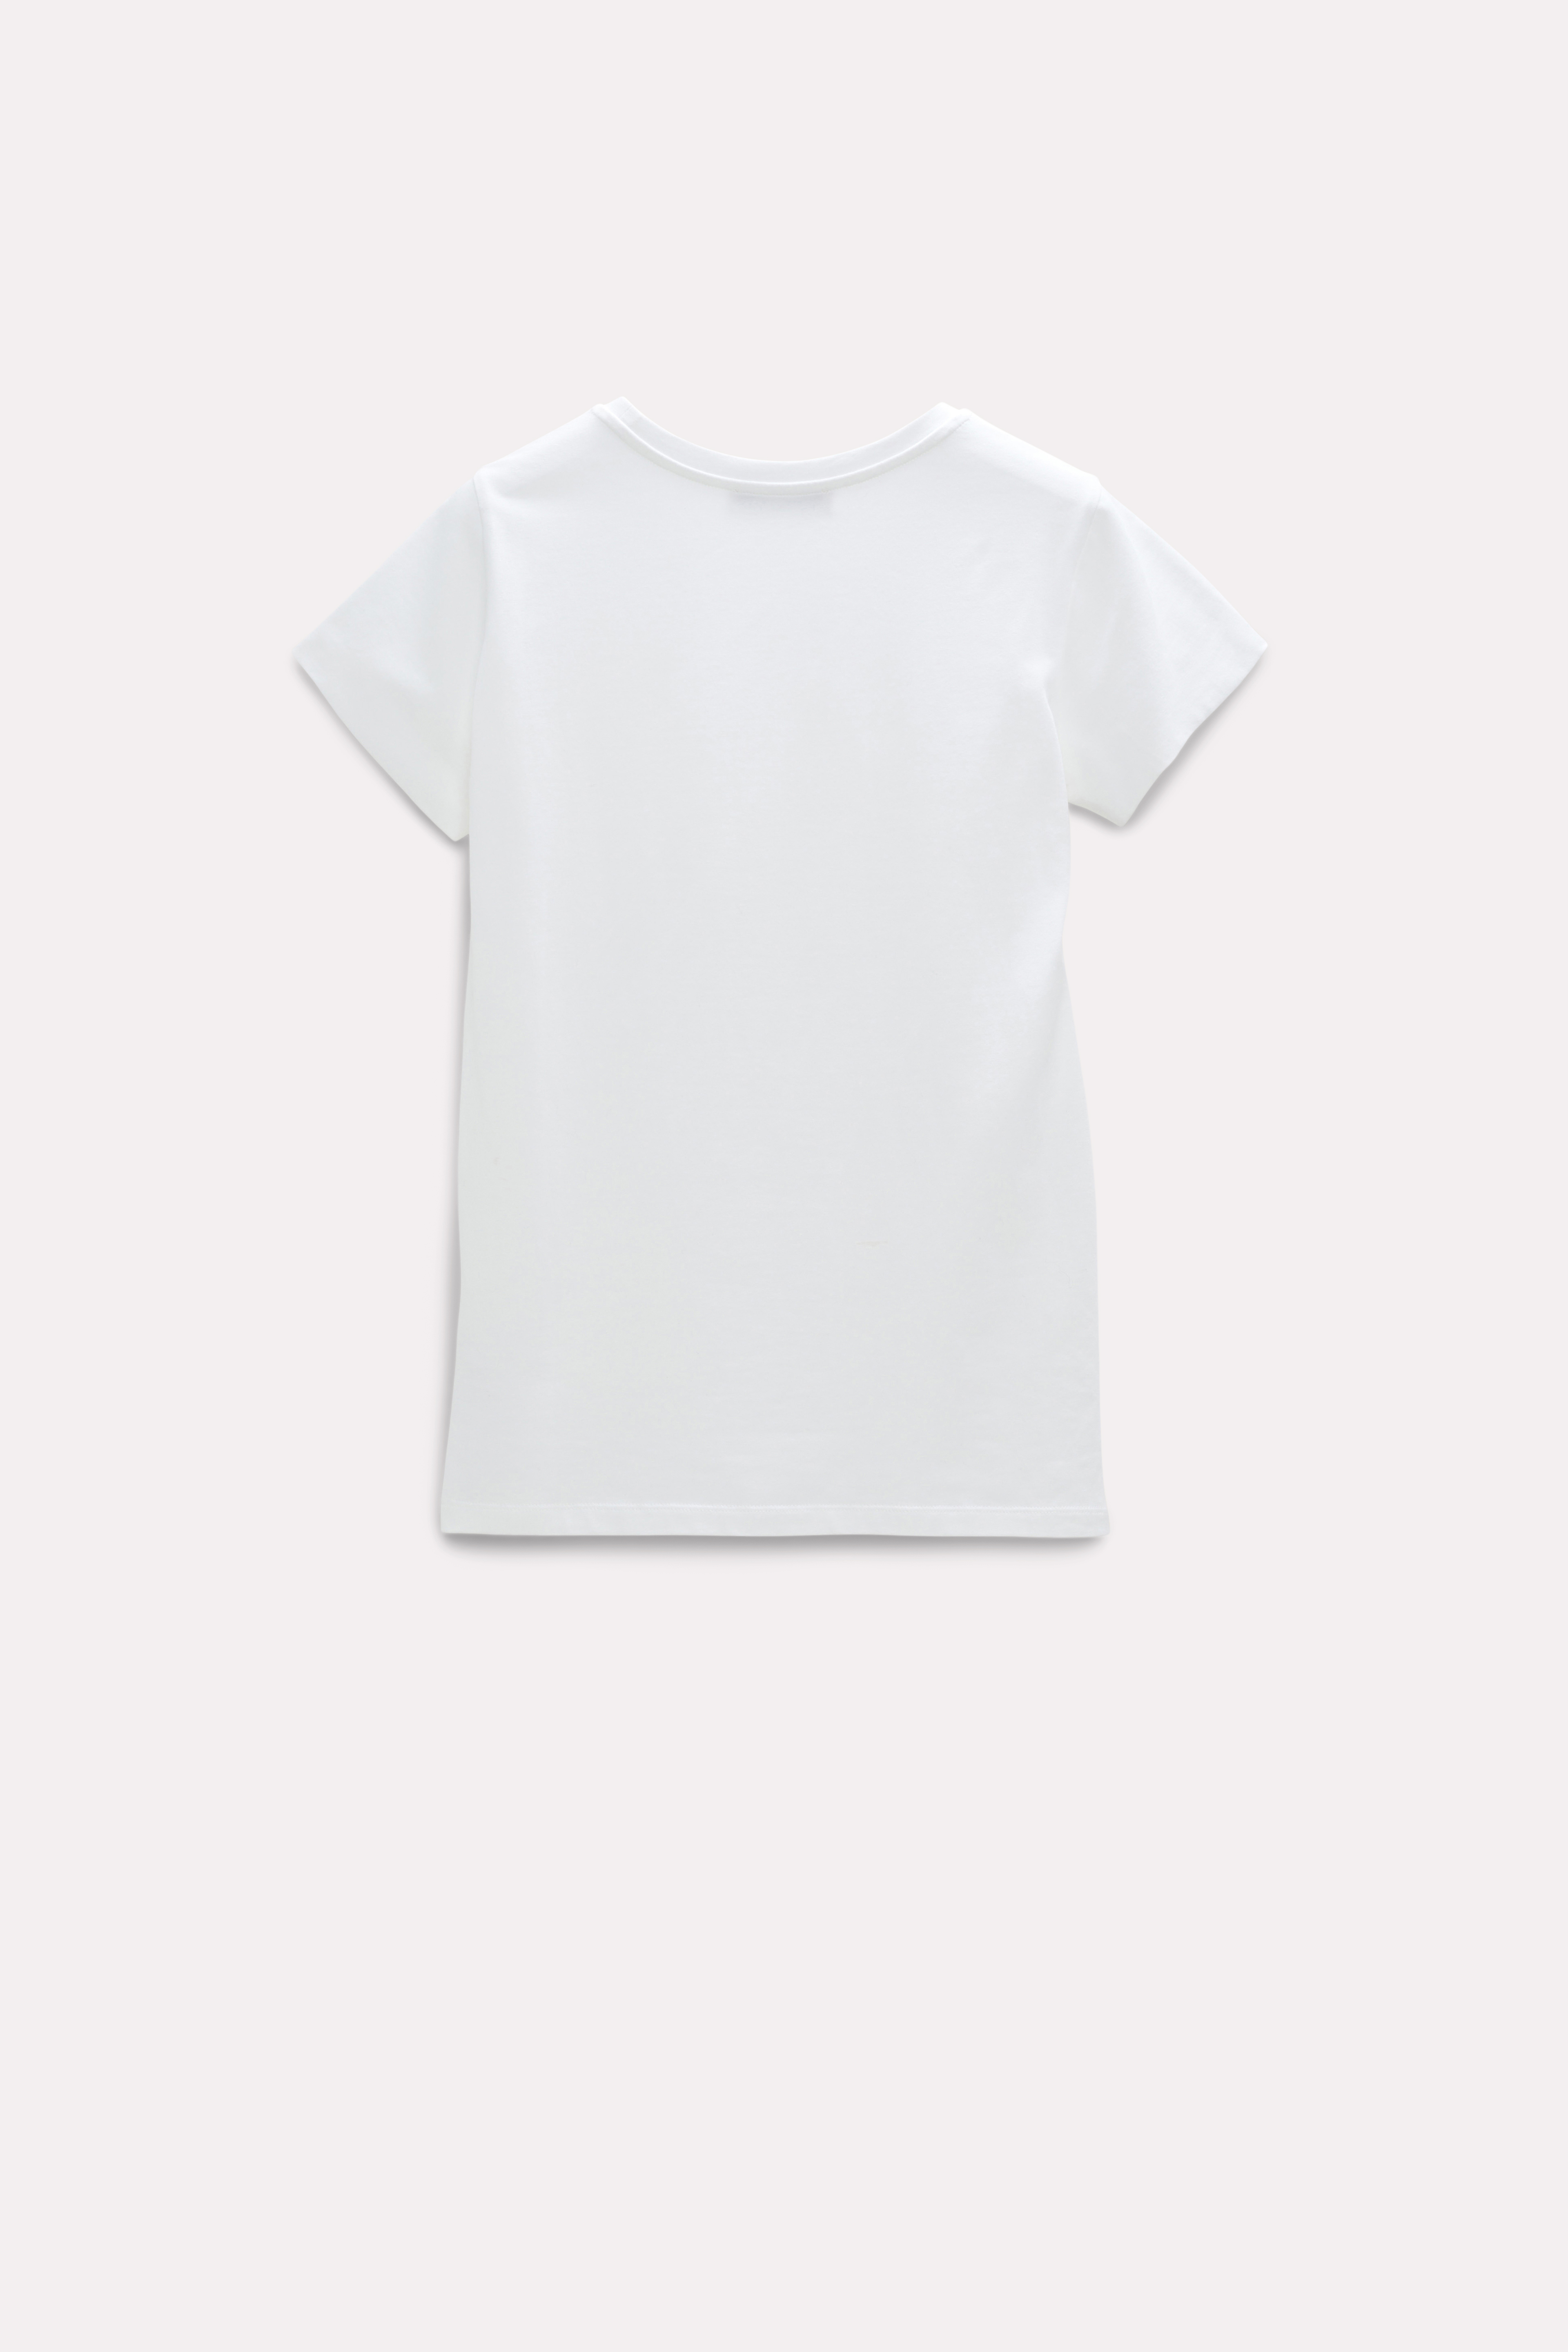 BASIC T-SHIRT IN COTTON JERSEY Basic on sale 2022 9